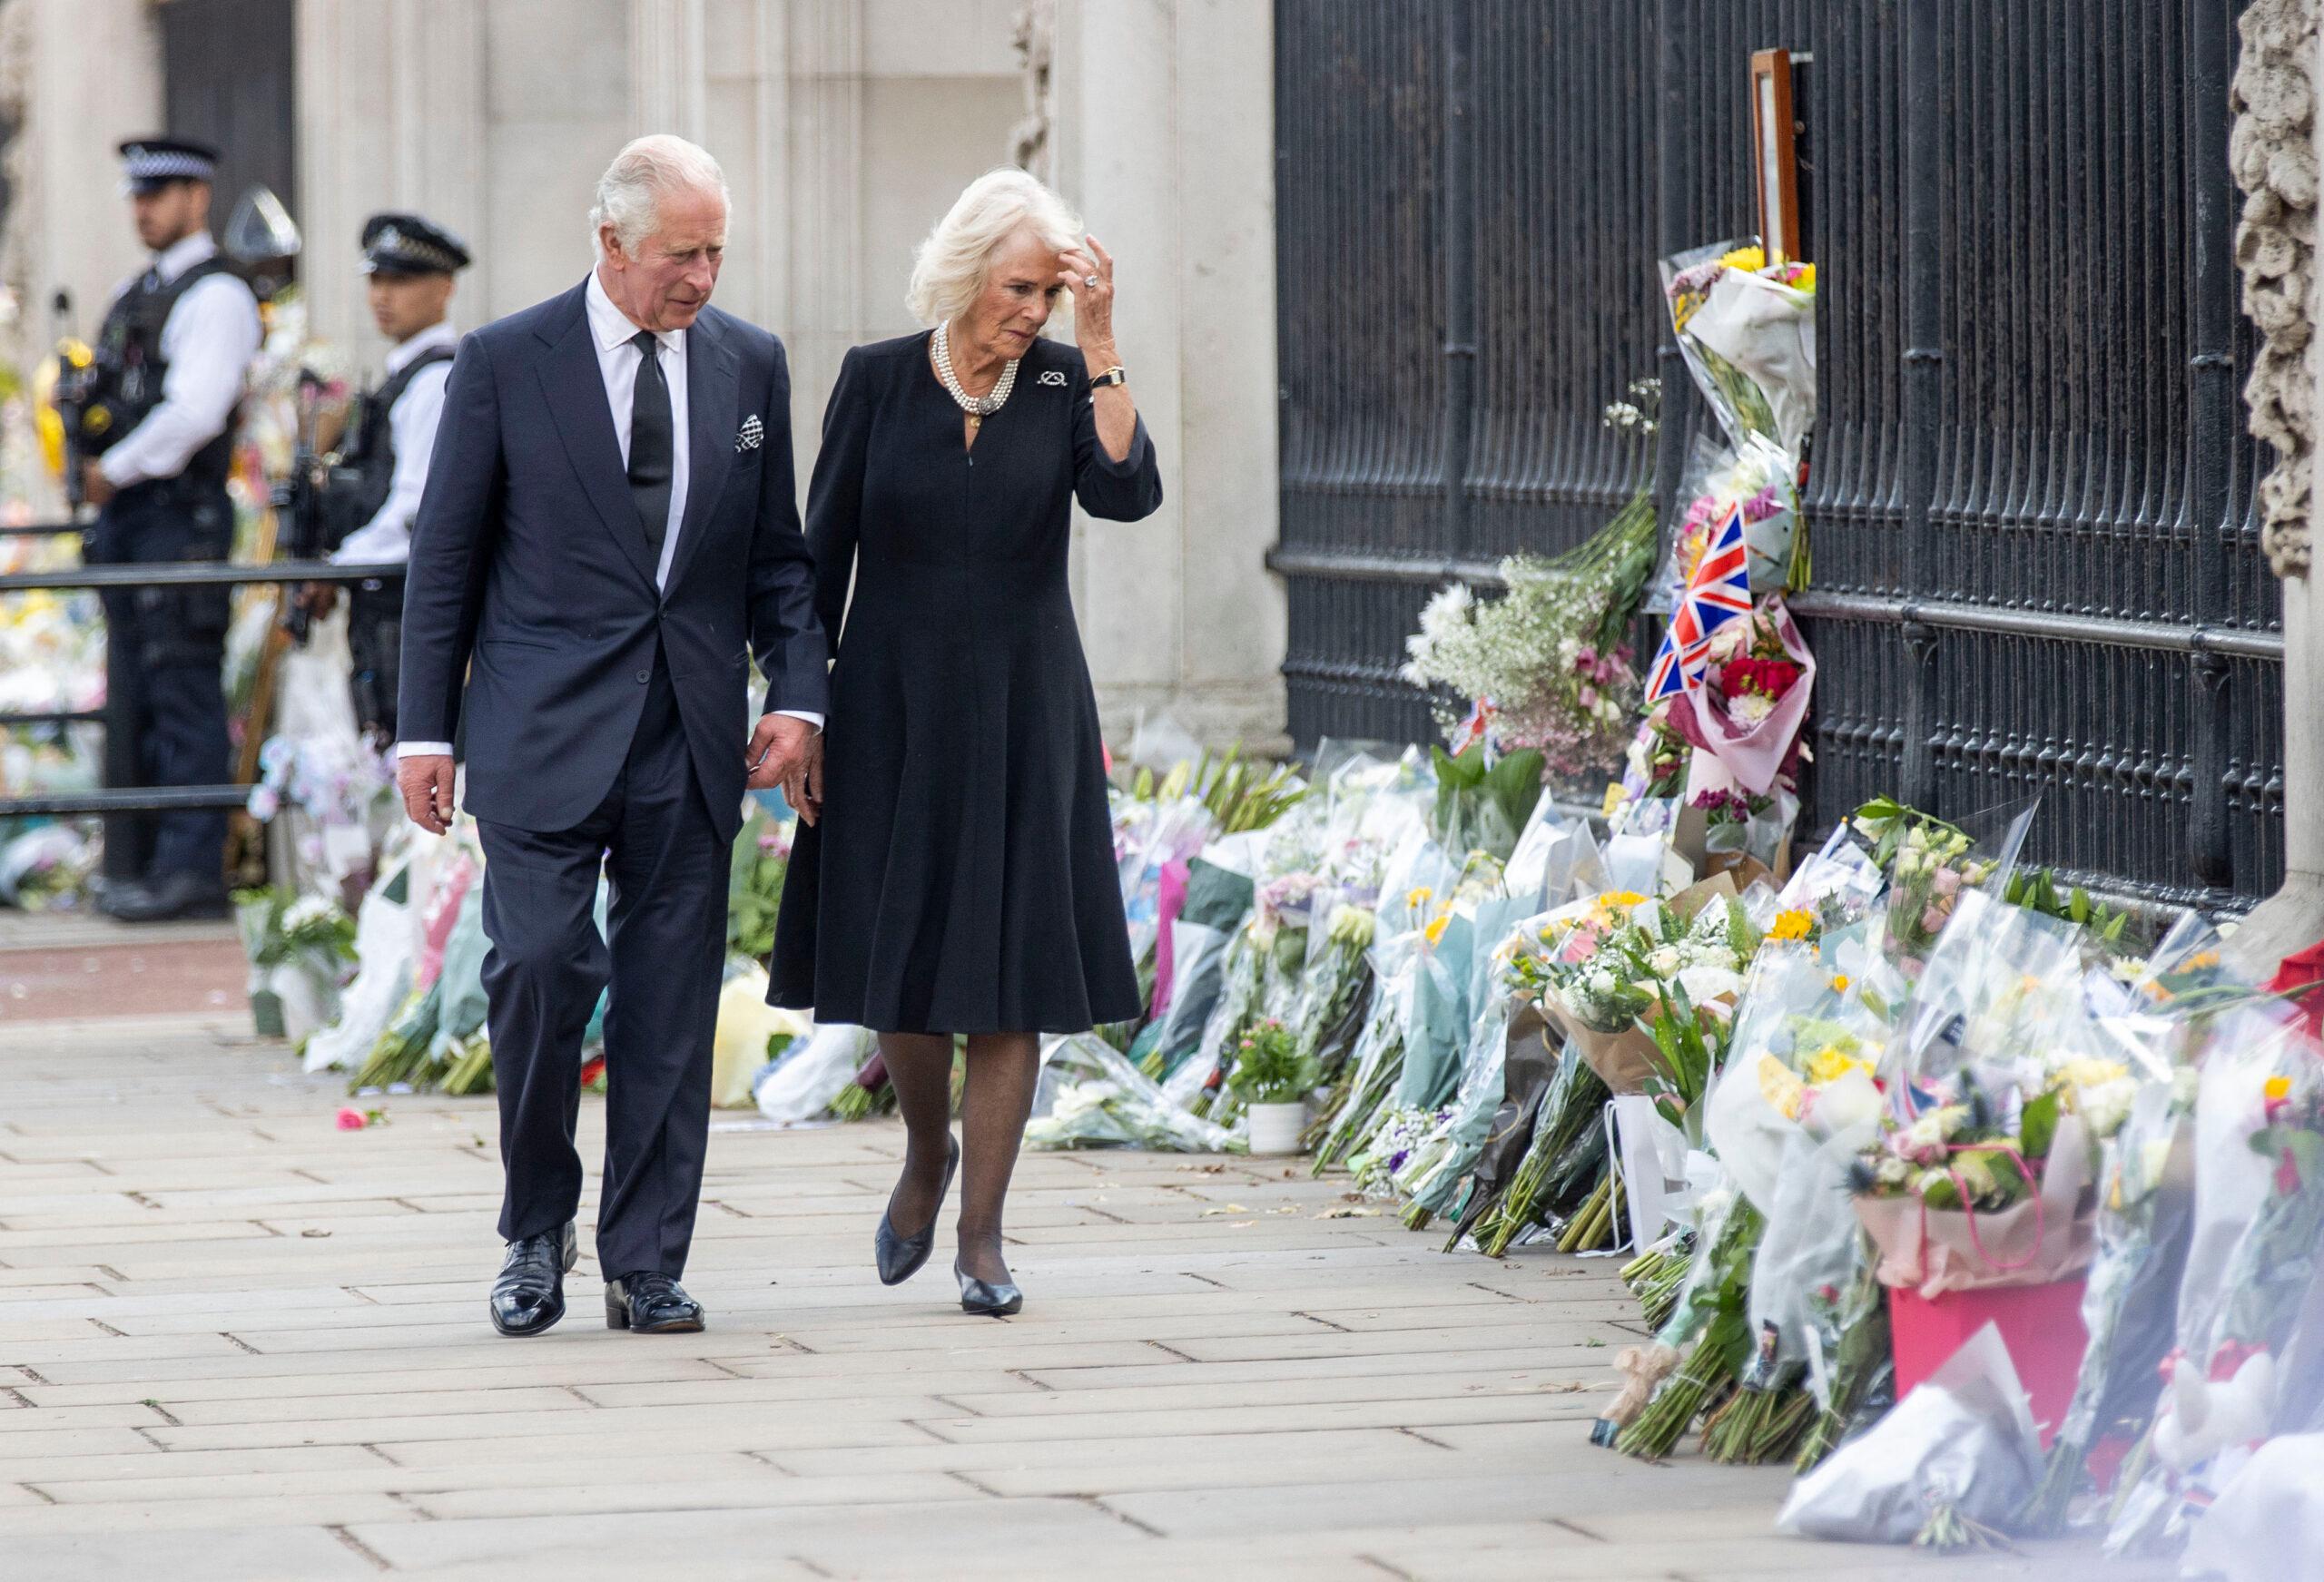 King Charles III and Queen Consort Camilla look at floral tributes left for Queen Elizabeth II outside Buckingham Palace in central London